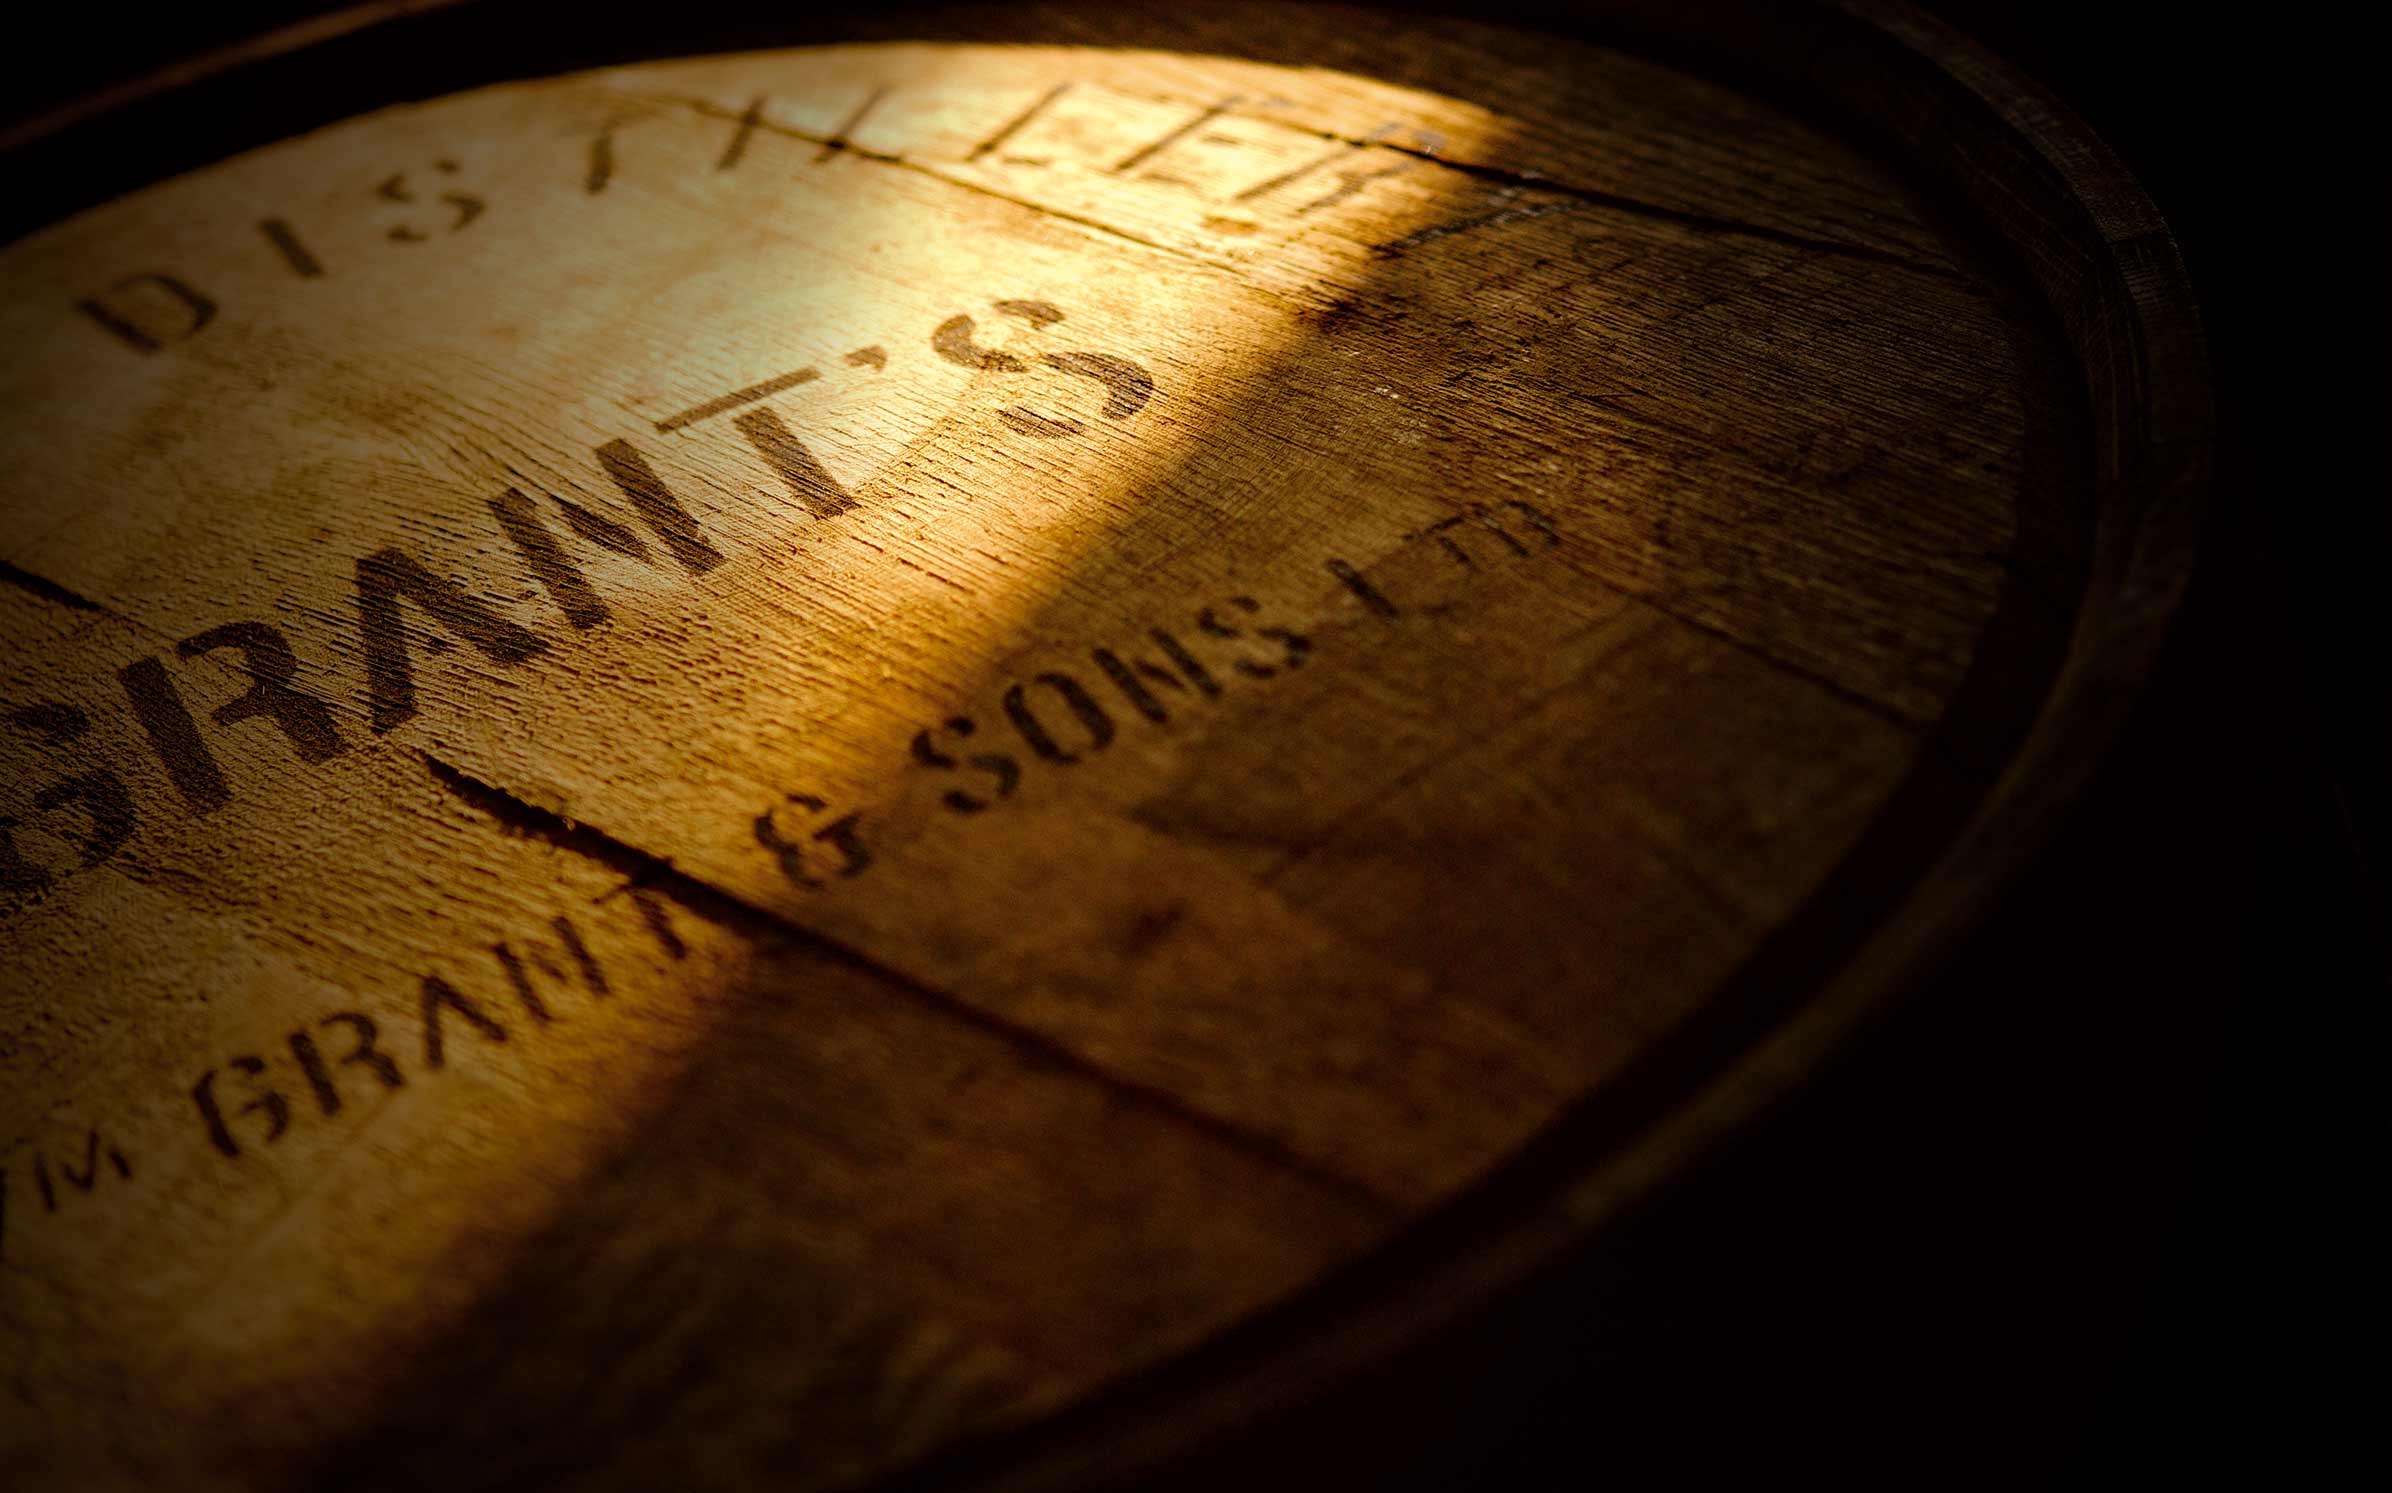 Top of whisky barrel with half shaded in shadow